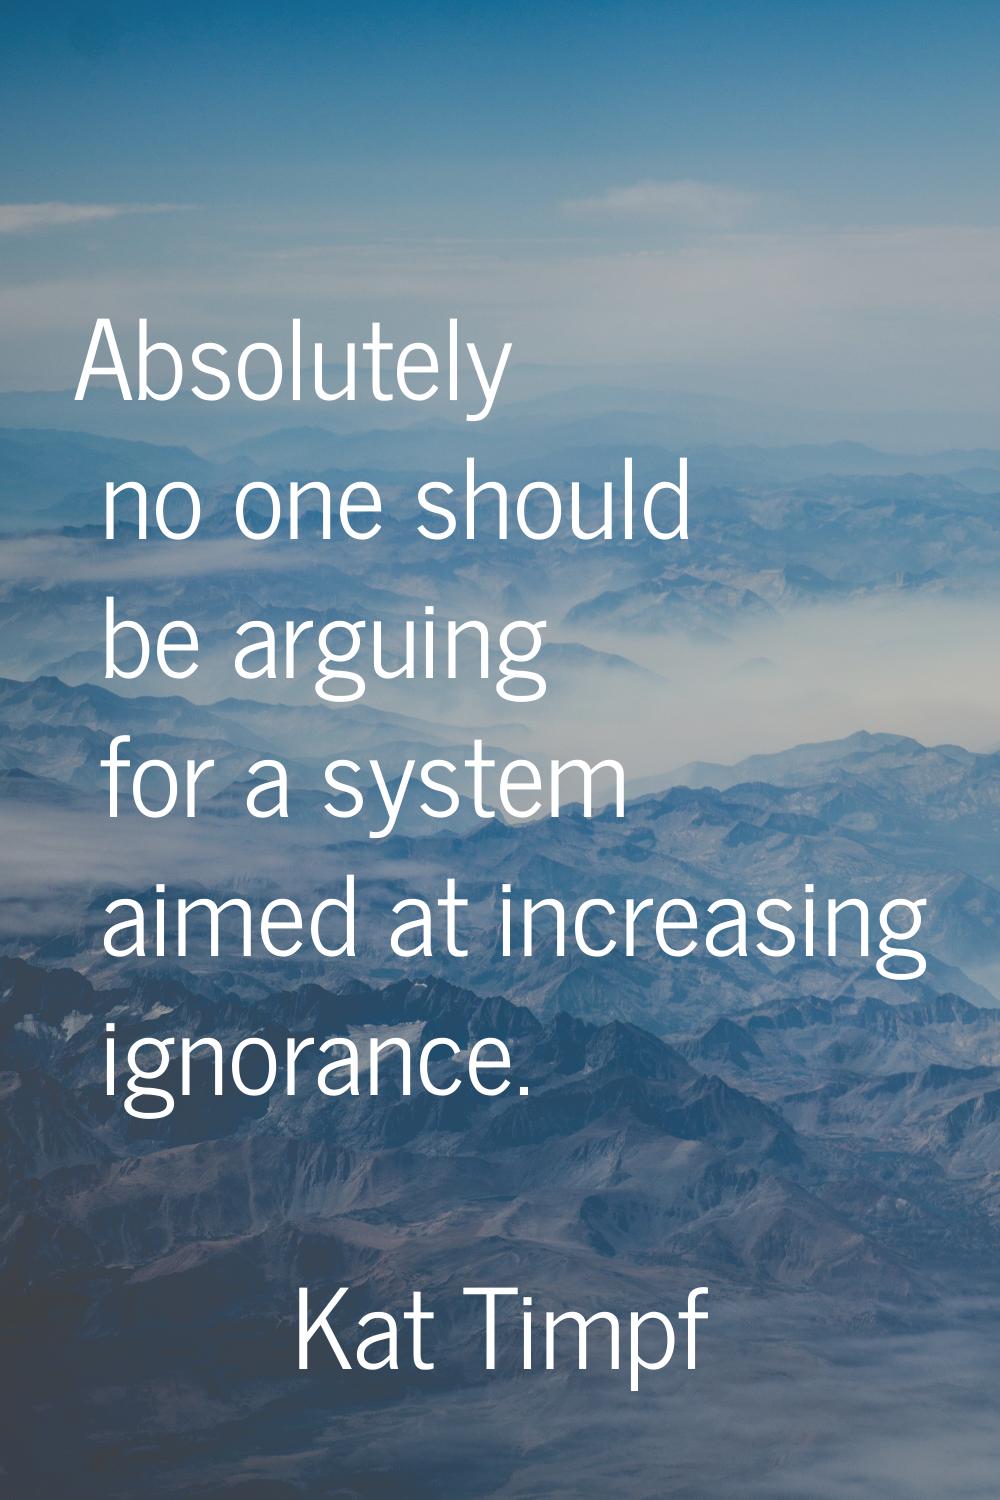 Absolutely no one should be arguing for a system aimed at increasing ignorance.